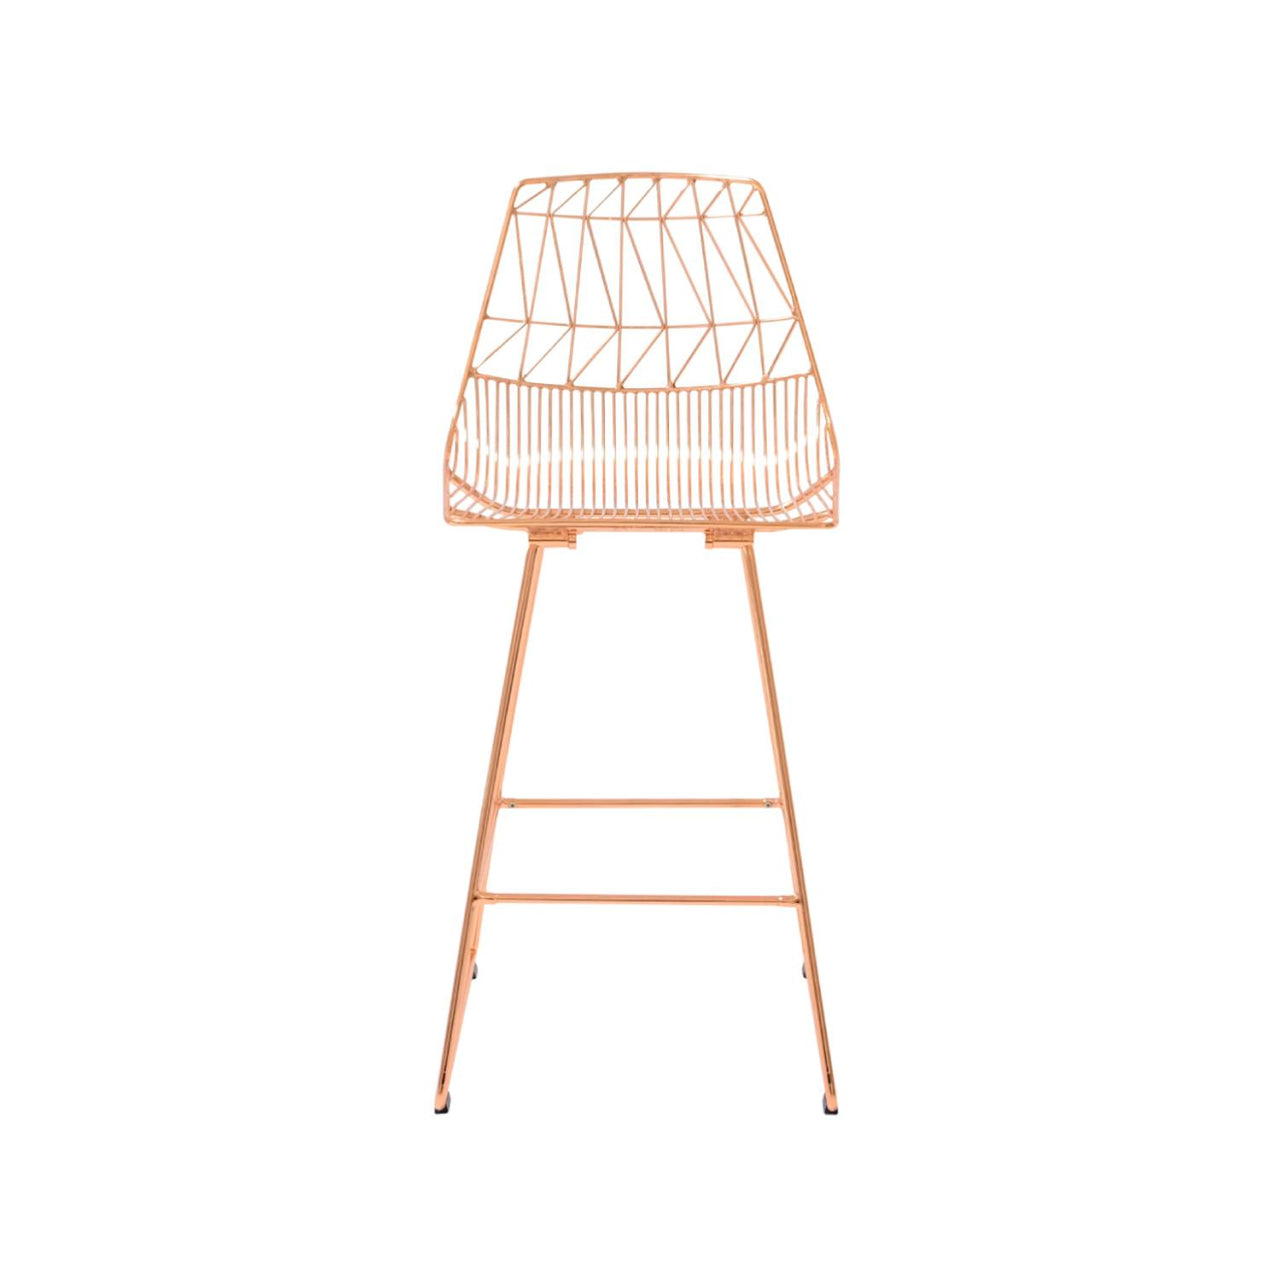 Lucy Bar + Counter Stool: Metallic + Counter + Without Seat Pad